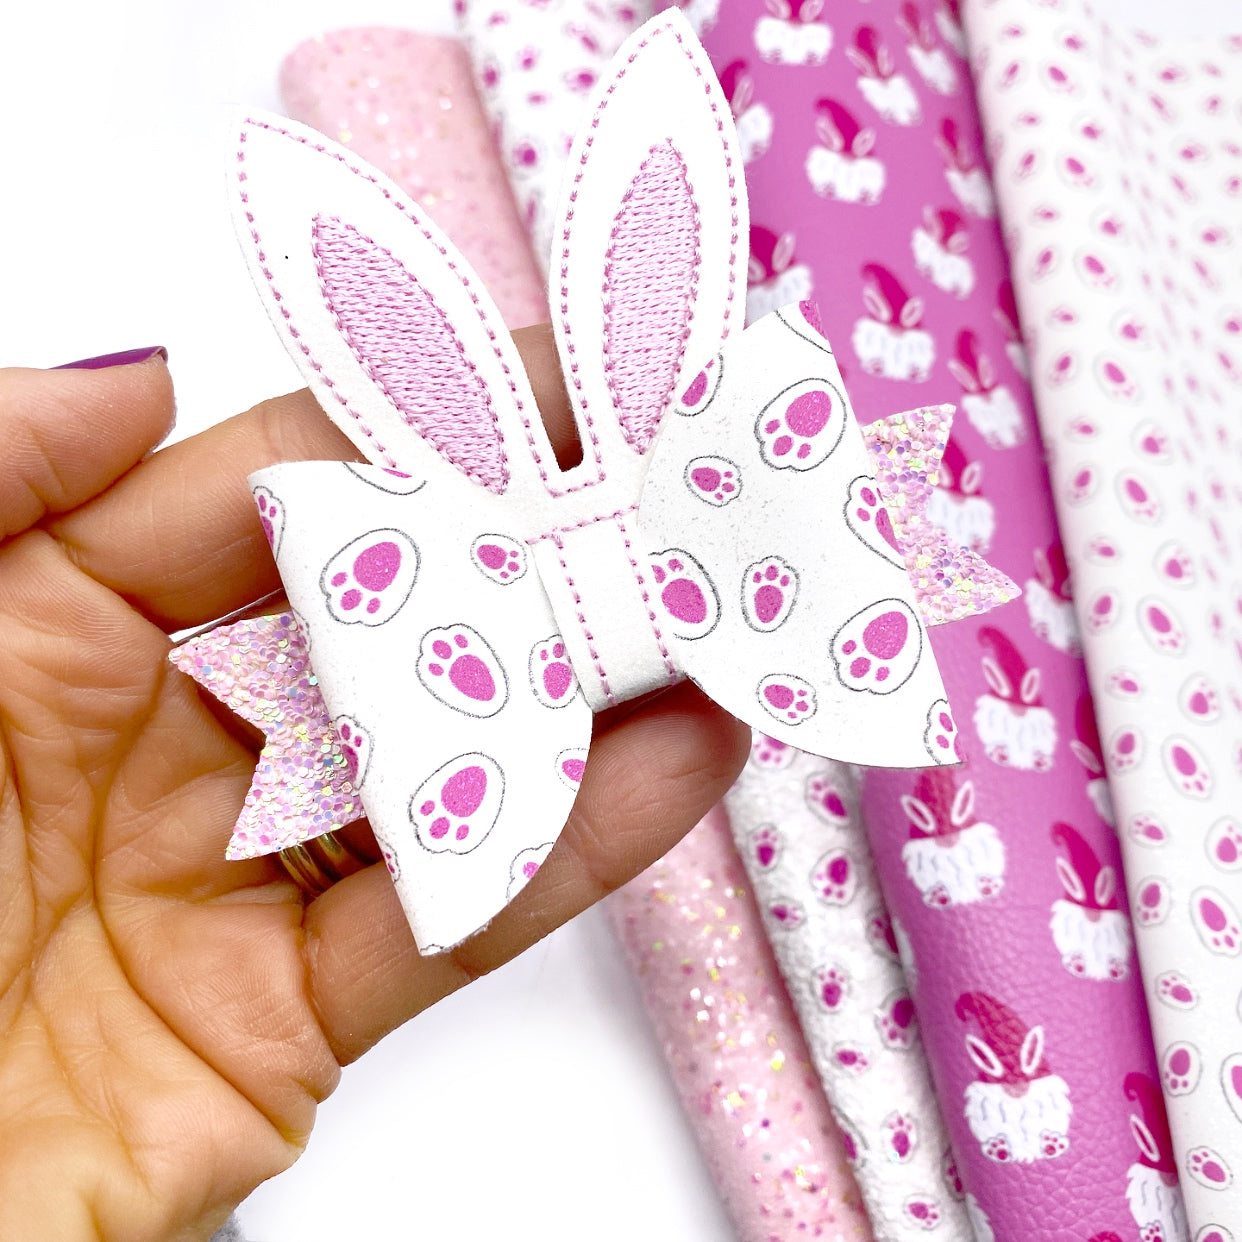 Exclusive White Bunny Ears Pop Up Bow Centre Glitter Felties